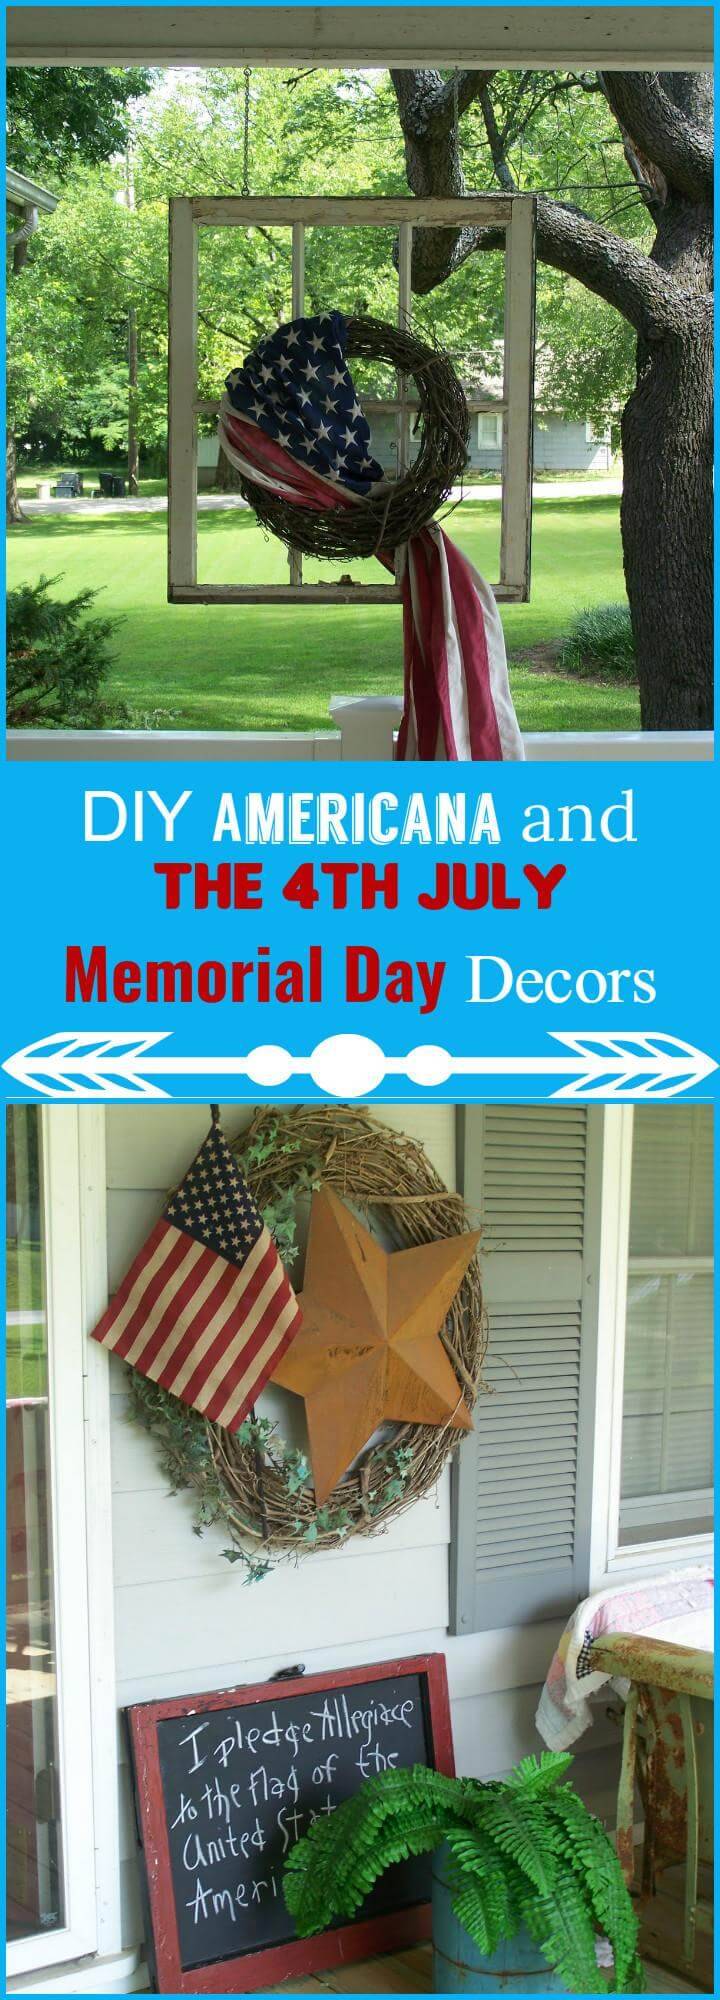 DIY Americana and 4th July Memorial Day Decors